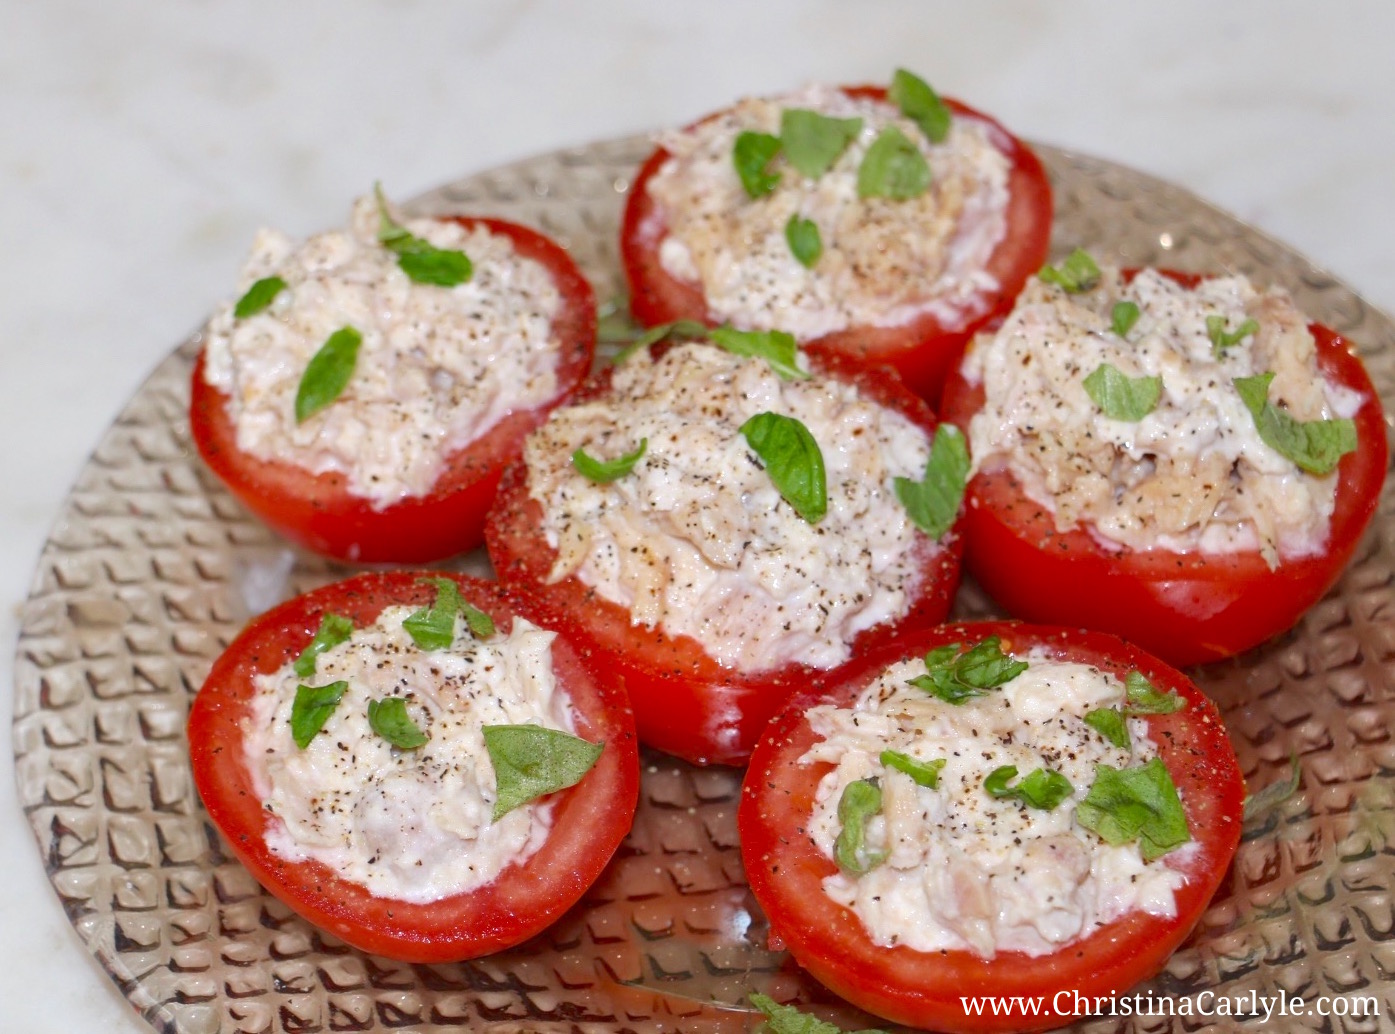 Healthy 4th of July Recipes - Healthy Tuna Stuffed Tomatoes from nutritionist Christina Carlyle. Nutritious, Delicious, and Easy Healthy 4th of July Recipes you can enjoy guilt-free. These delicious, Healthy 4th of July Recipes are high in nutrients and fiber but low in calories, fat, and sugar. https://www.christinacarlyle.com/healthy-4th-of-july-recipes